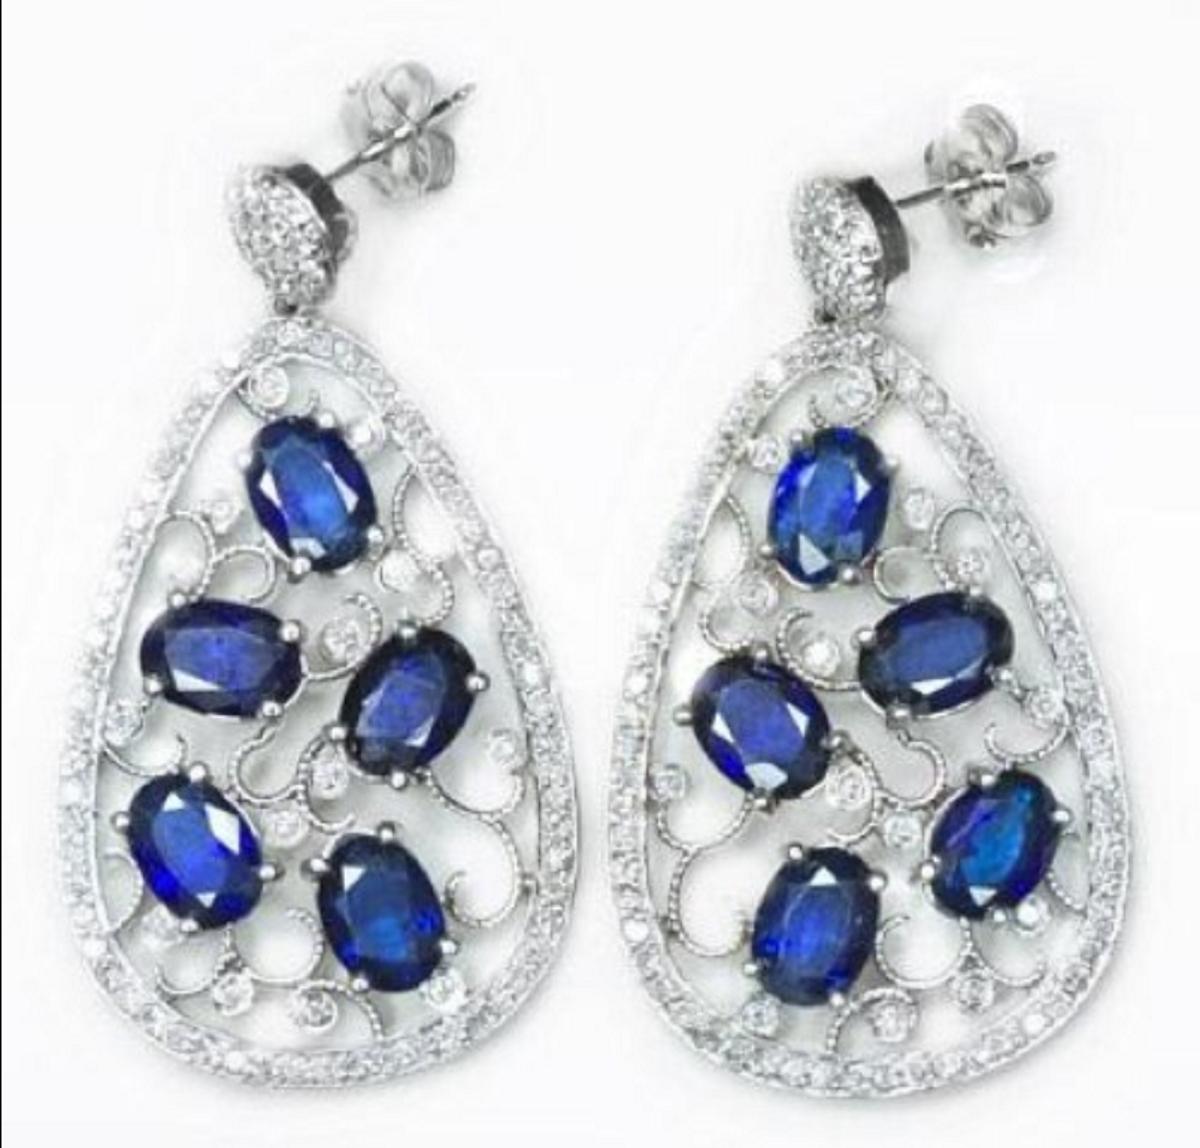 10 carats of natural sapphires and 1.5 carats of natural diamonds. The blue color is gorgeous and is well complimented by the white diamonds. The sapphires each measure 7mm x 5mm and are surrounded by a filigree pattern with lovely milgrain. There